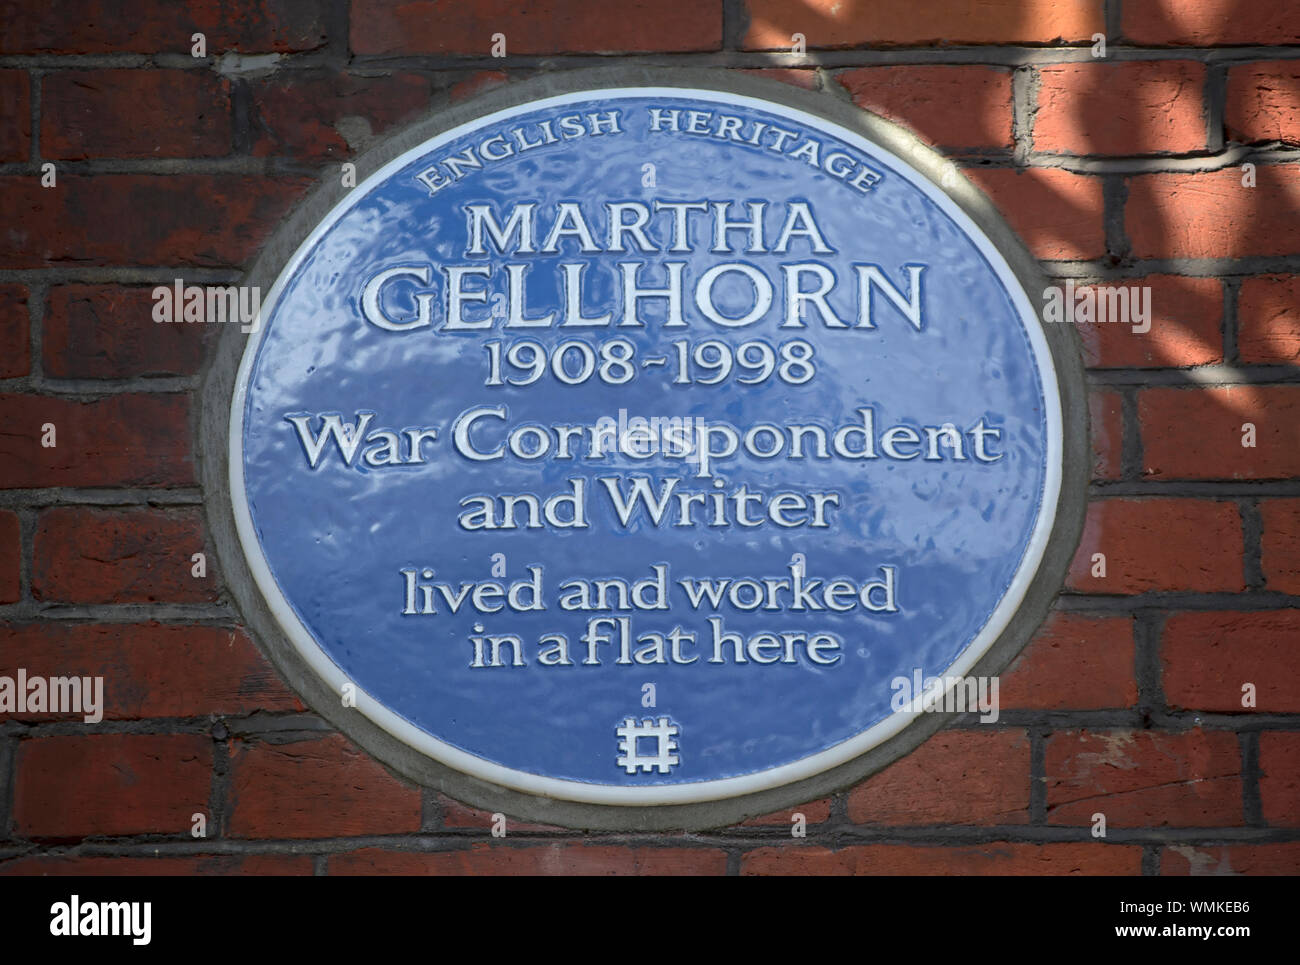 english heritage blue plaque marking a home of war correspondent and writer martha gellhorn, cadogan square, chelsea, london, england Stock Photo